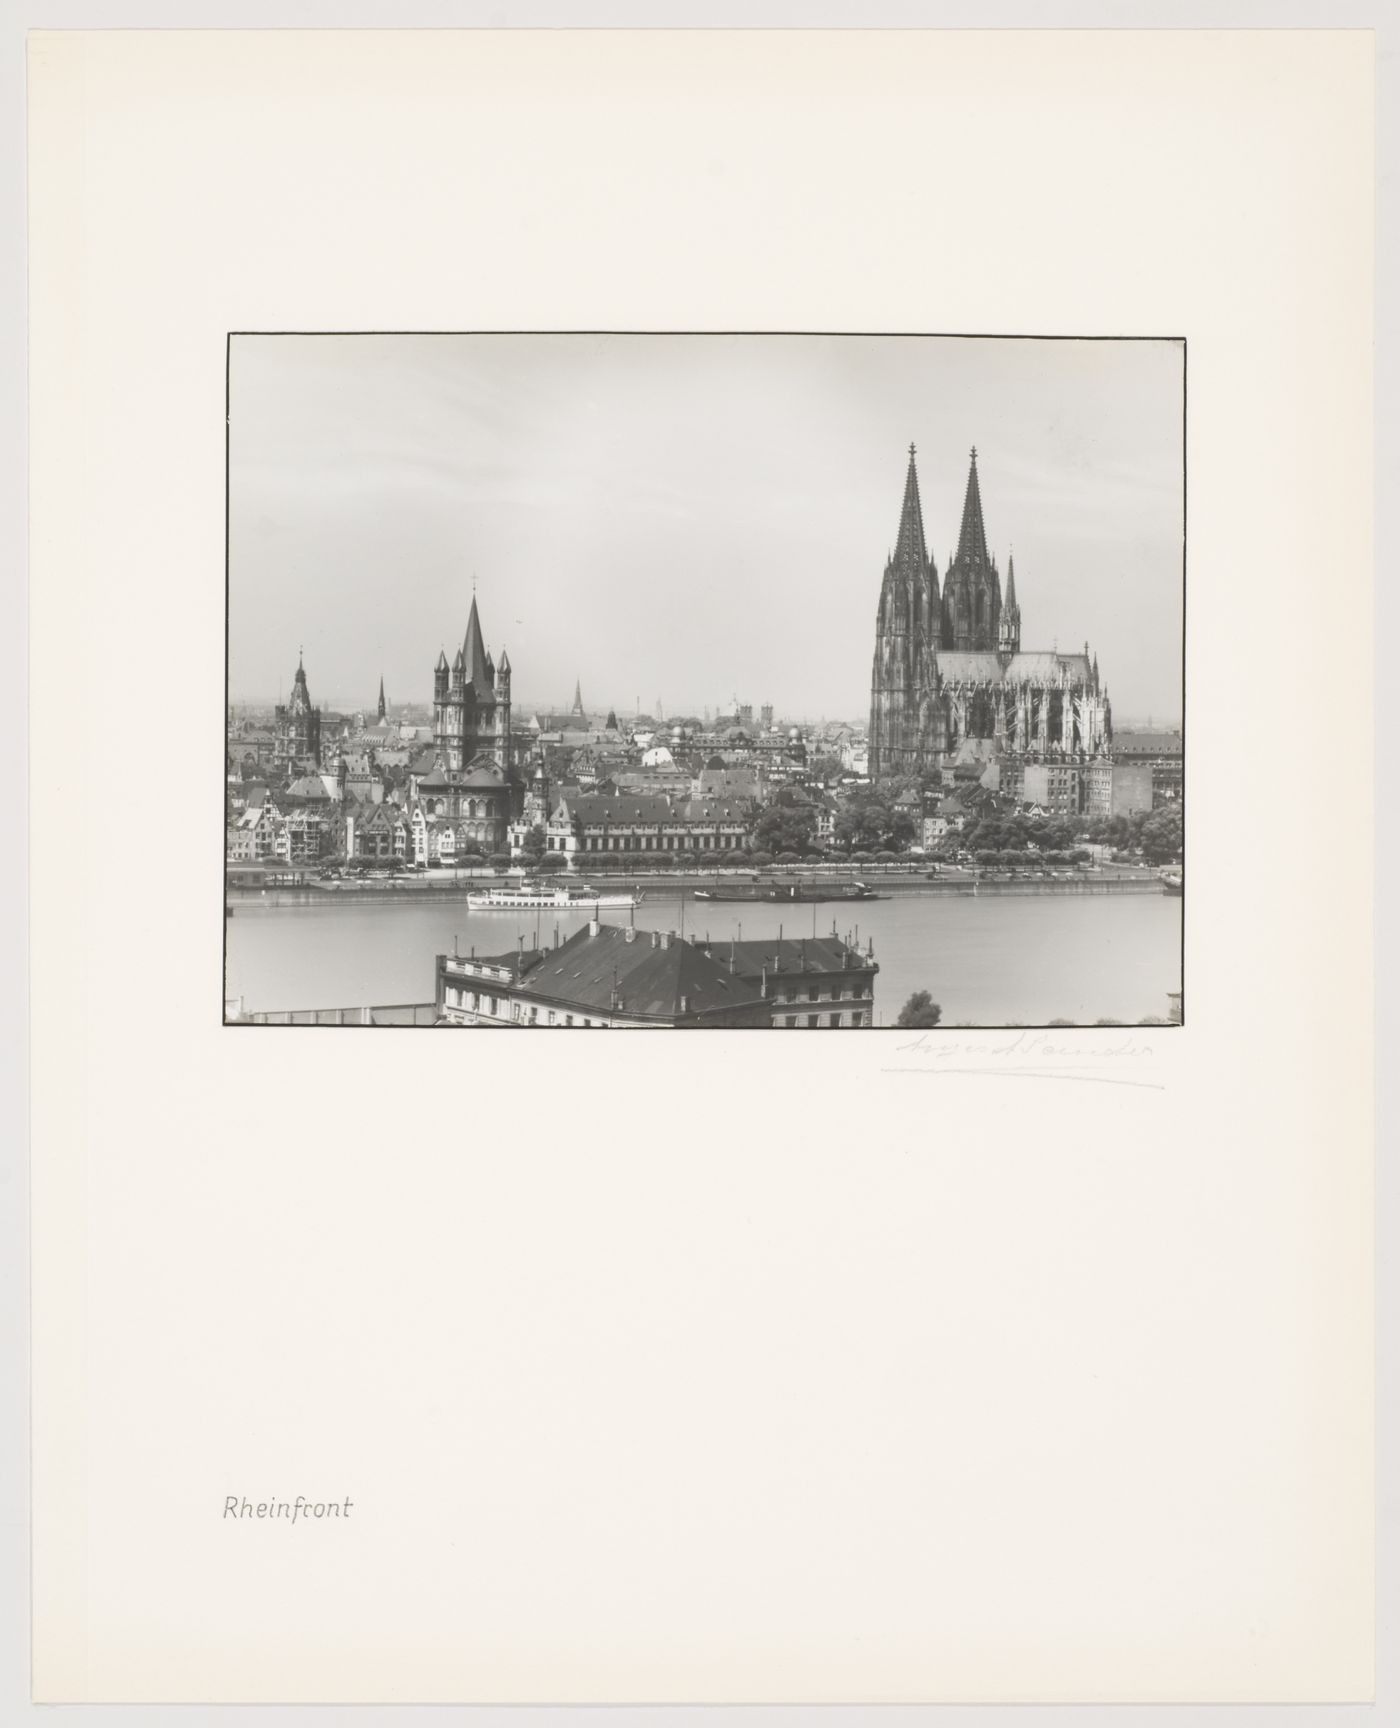 View of the Rhine front, Cologne, Germany